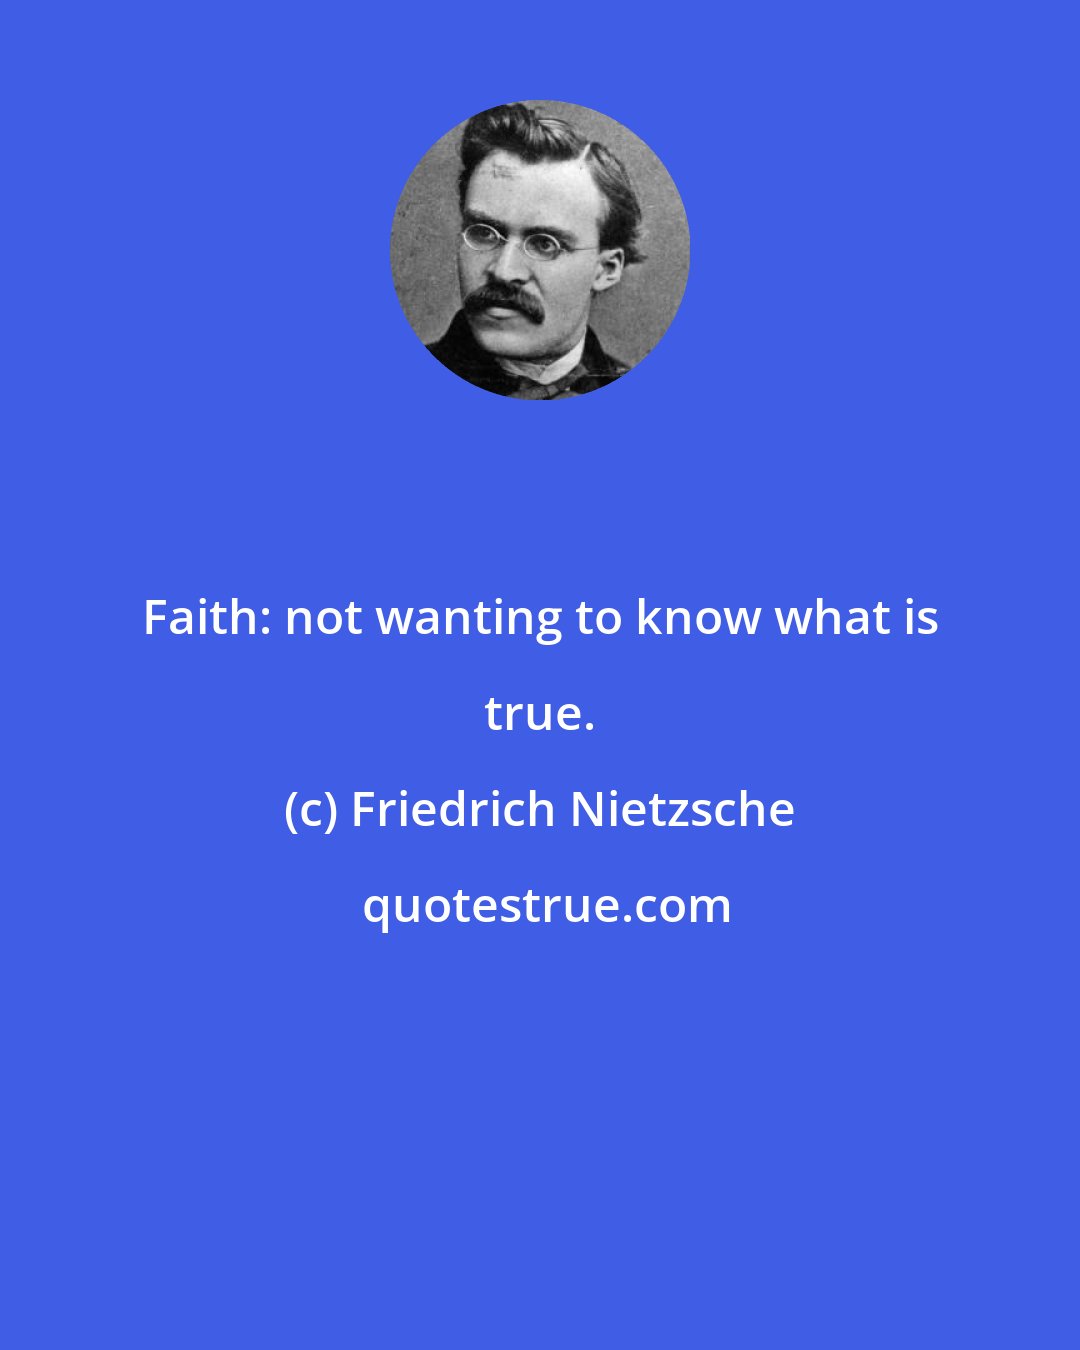 Friedrich Nietzsche: Faith: not wanting to know what is true.